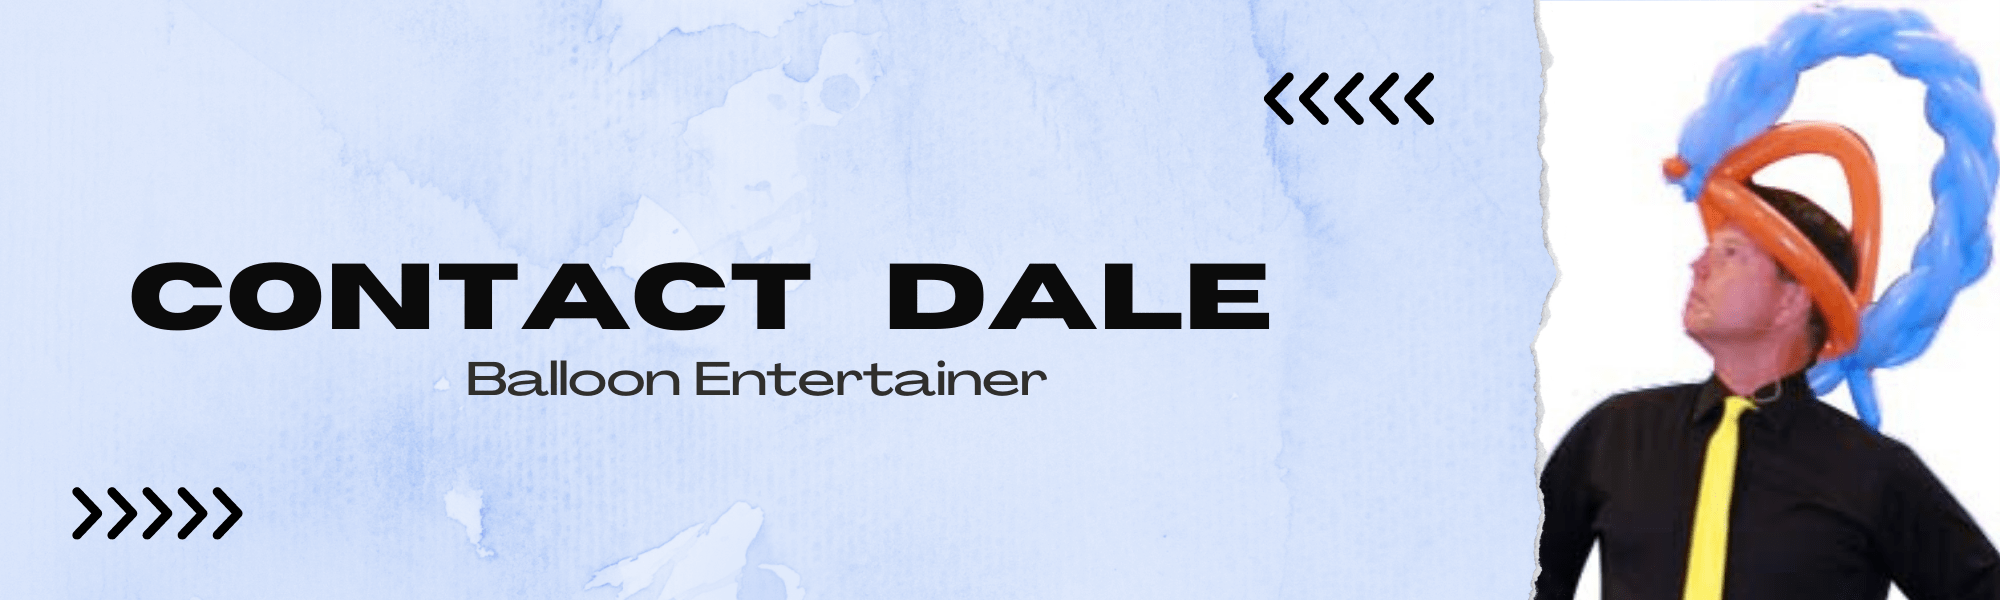 Contact Dale Banner